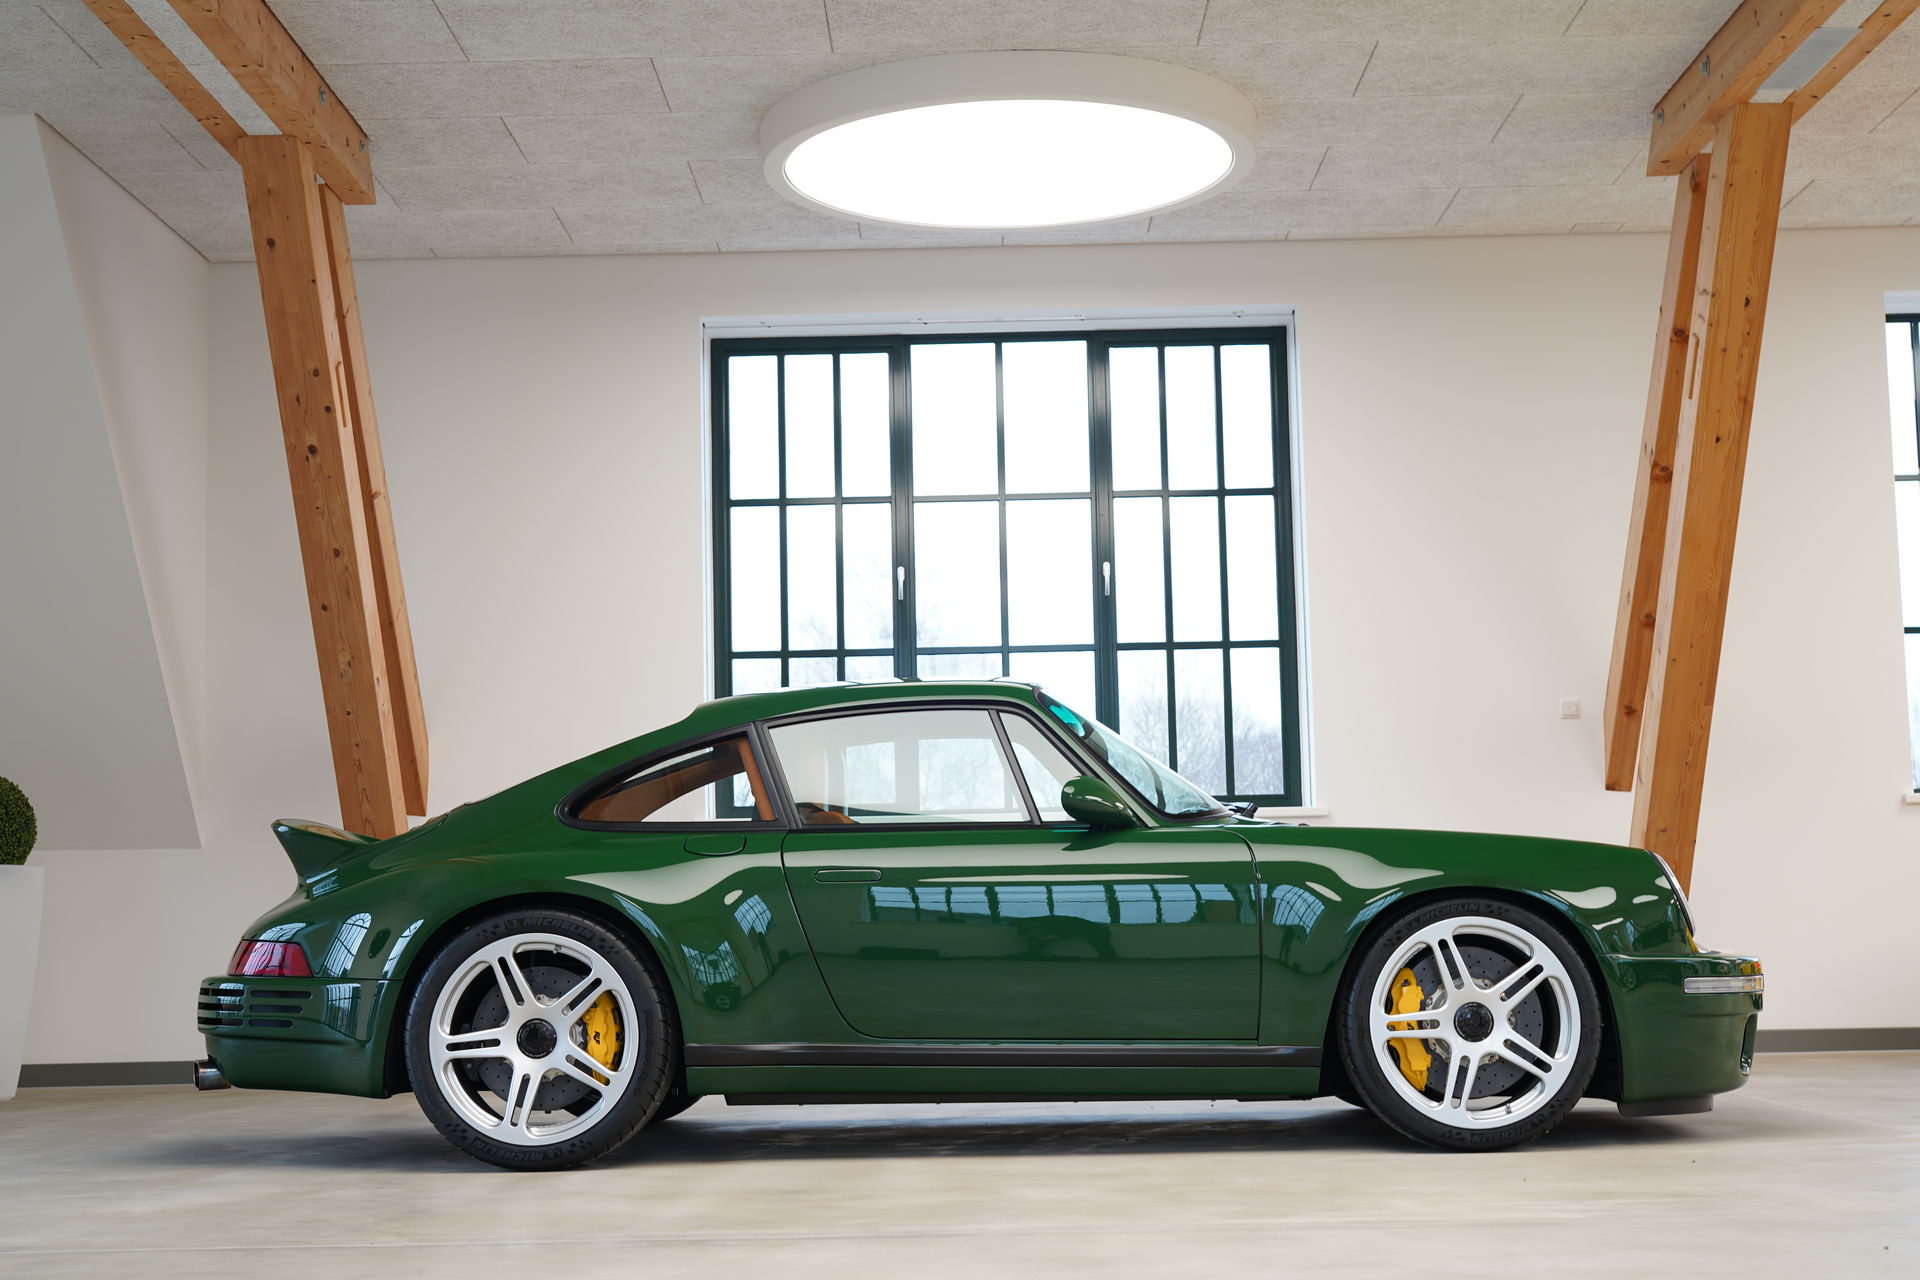 First Production Spec 2020 RUF SCR Completed